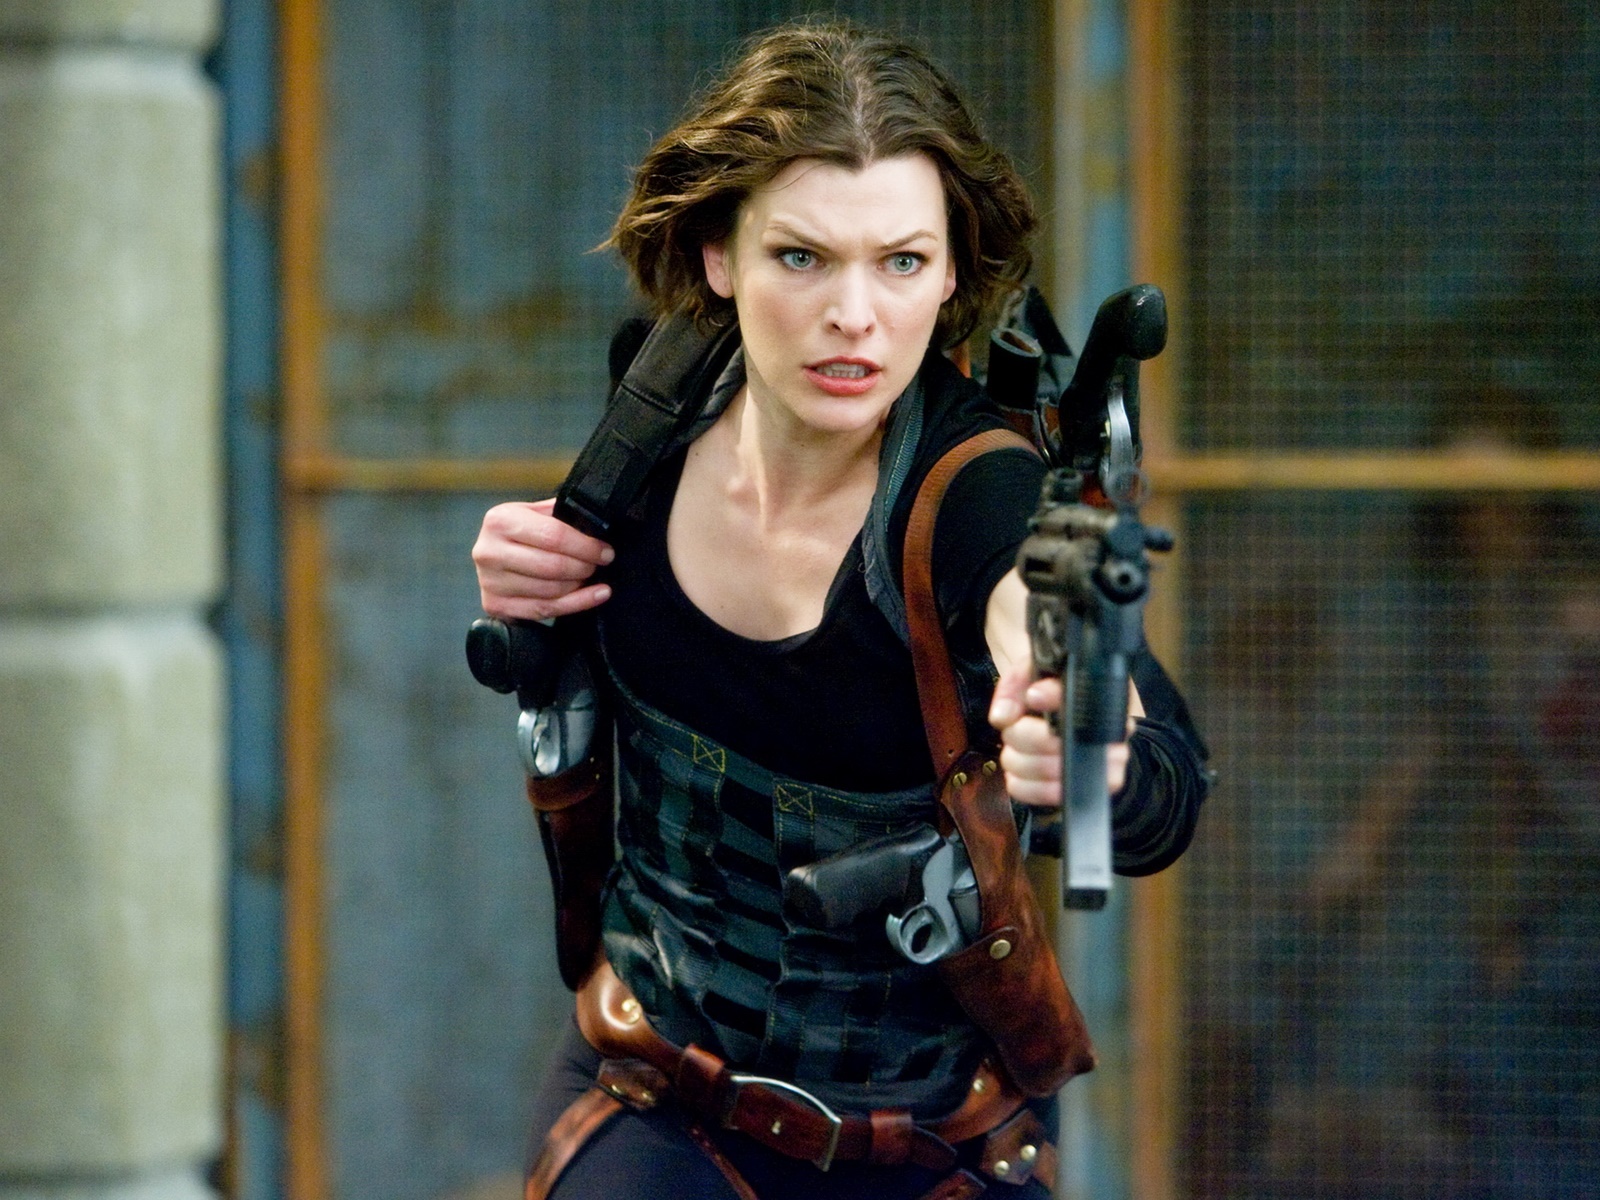 Resident Evil: The Final Chapter Cast, Synopsis Revealed